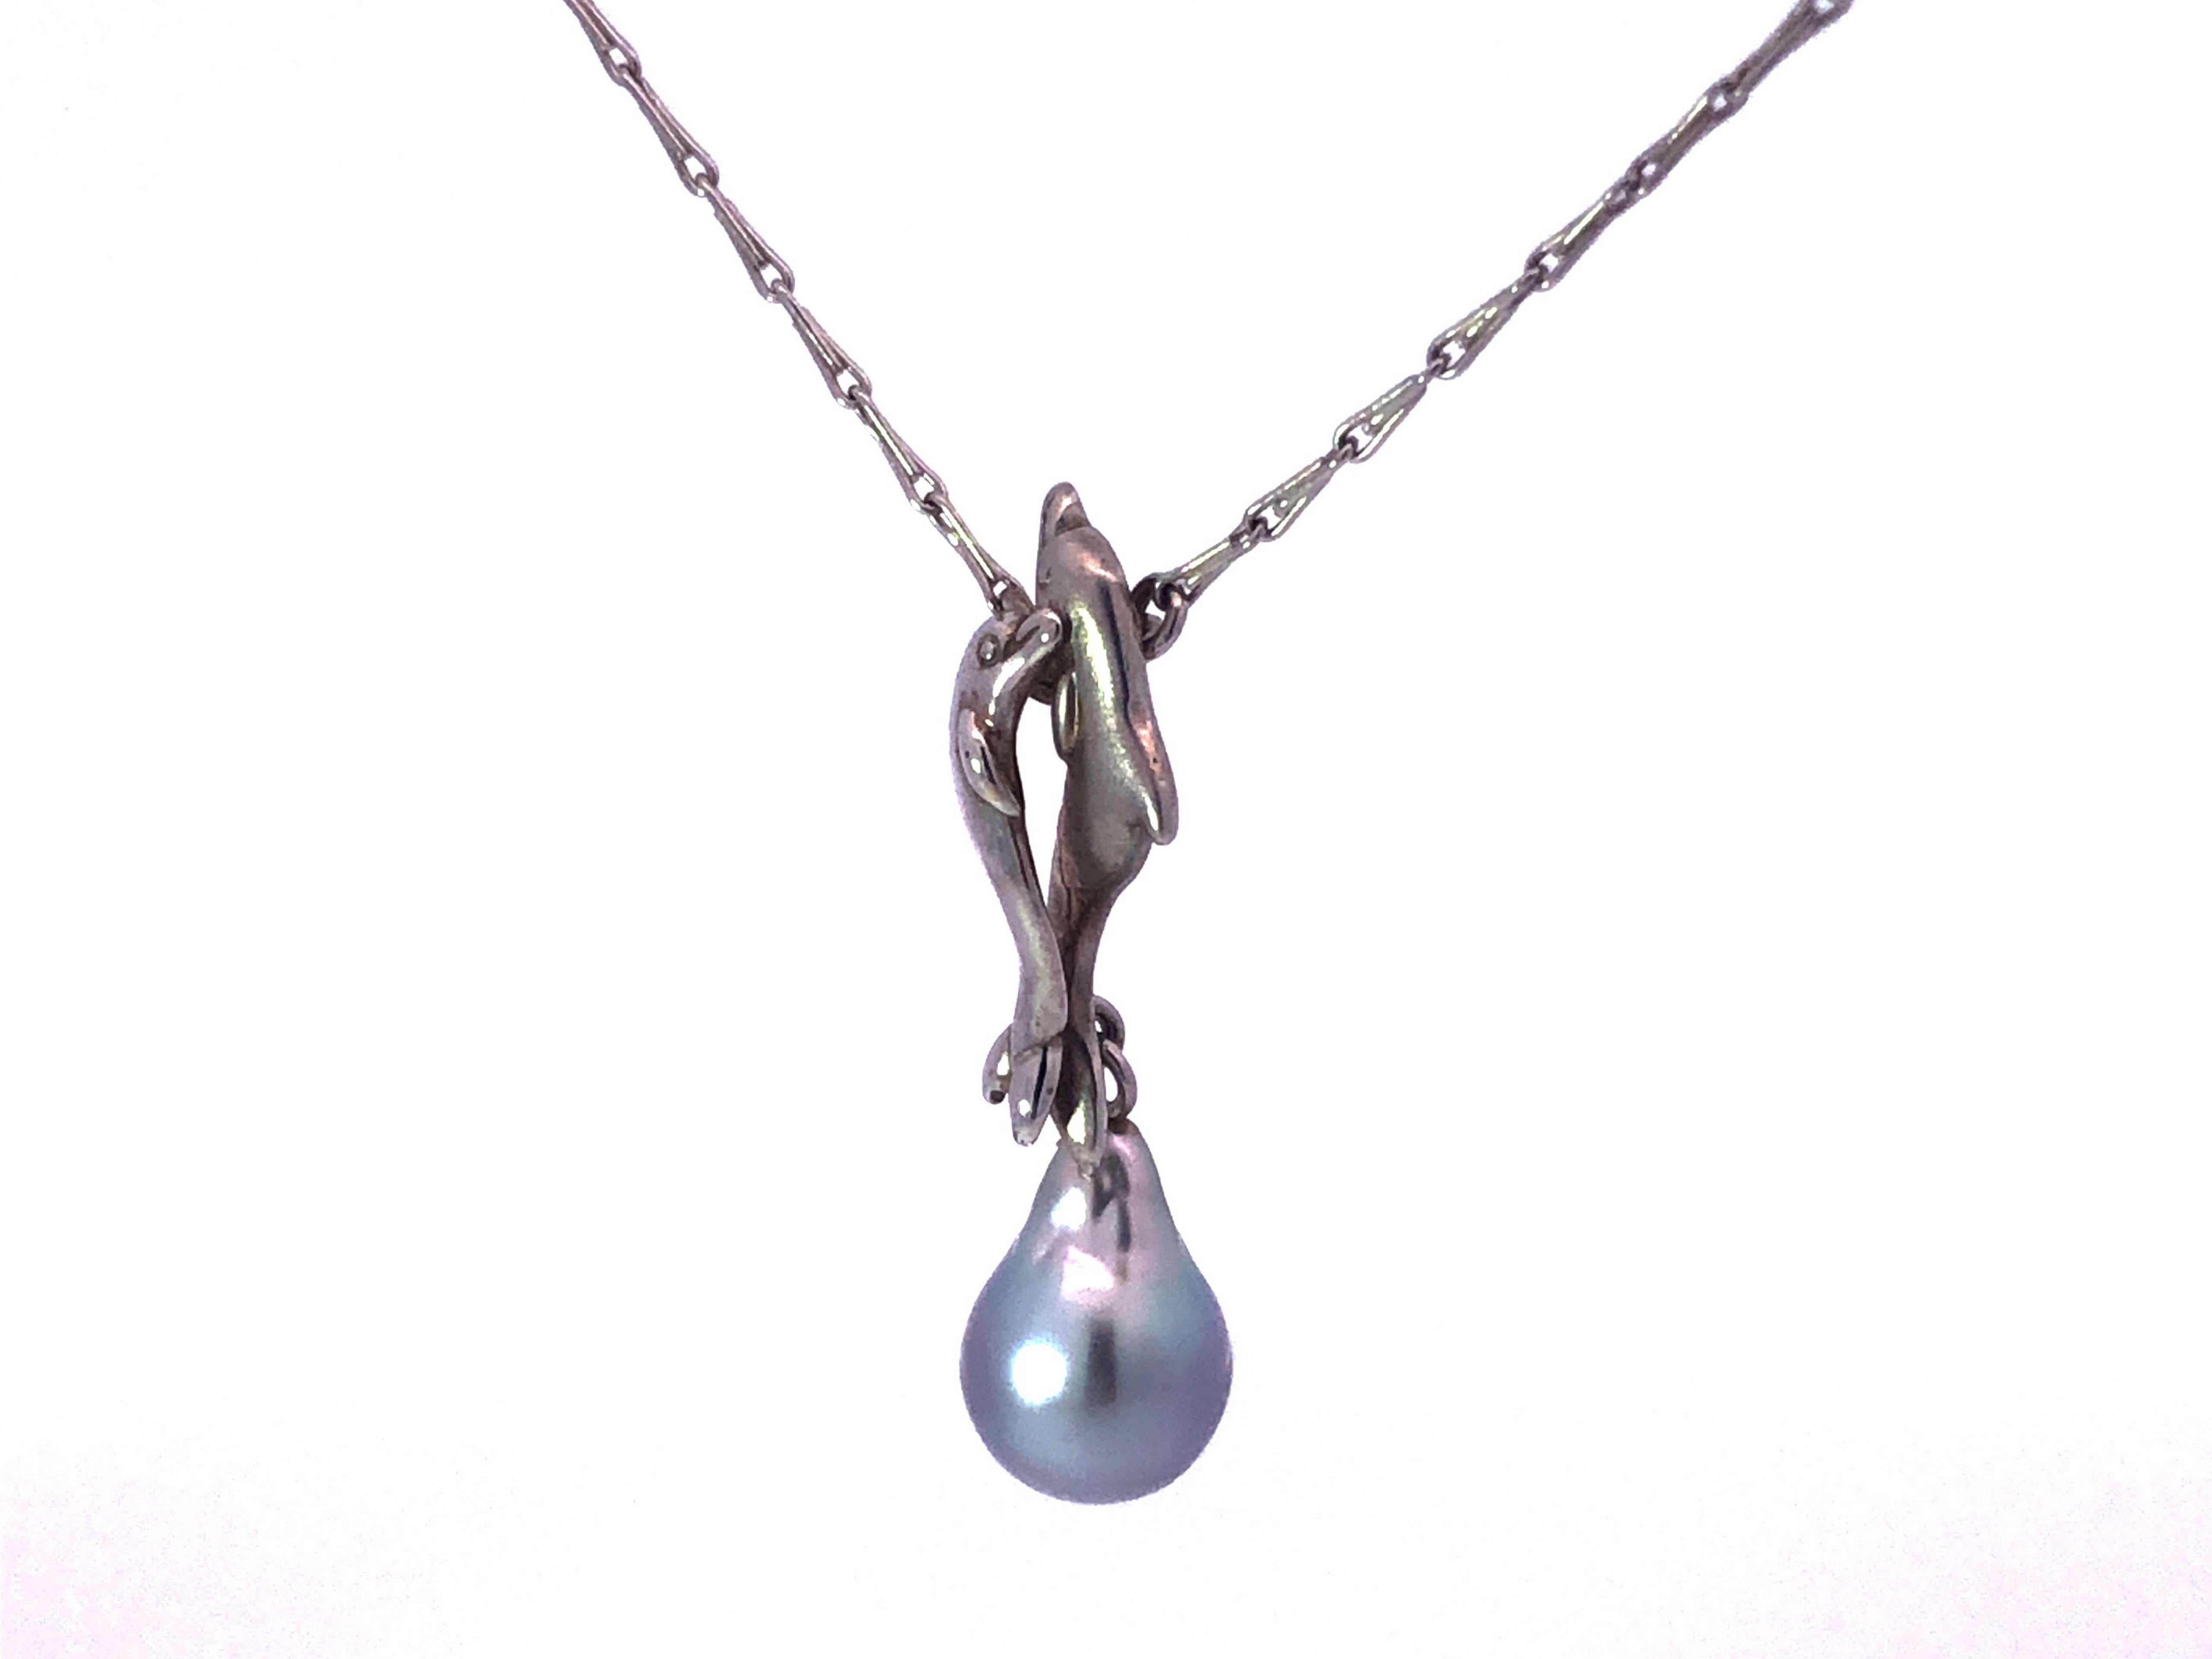 Two Dolphins & Silver Pearl Motif Necklace in 14k White Gold In Good Condition For Sale In Honolulu, HI